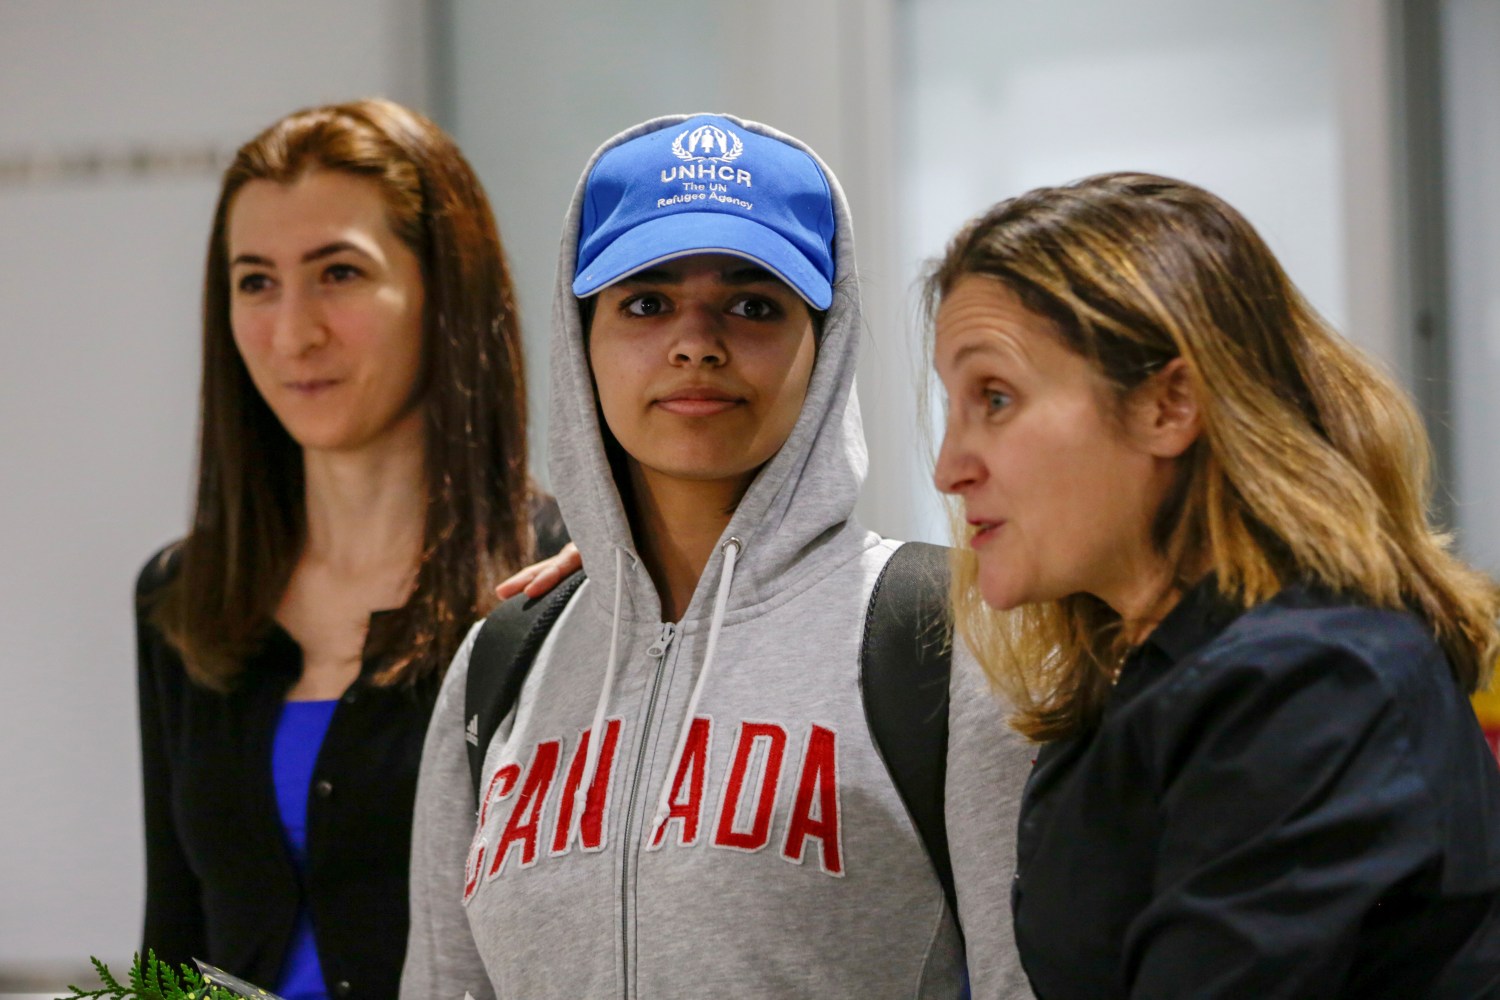 Rahaf Mohammed al-Qunun (C), an 18-year-old Saudi woman who fled her family, accompanied by Canadian Minister of Foreign Affairs Chrystia Freeland (R) and Saba Abbas, general counsellor of COSTI refugee service agency, arrives at Toronto Pearson International Airport in Toronto, Ontario, Canada January 12, 2019.  REUTERS/Carlos Osorio - RC1A167A5FB0